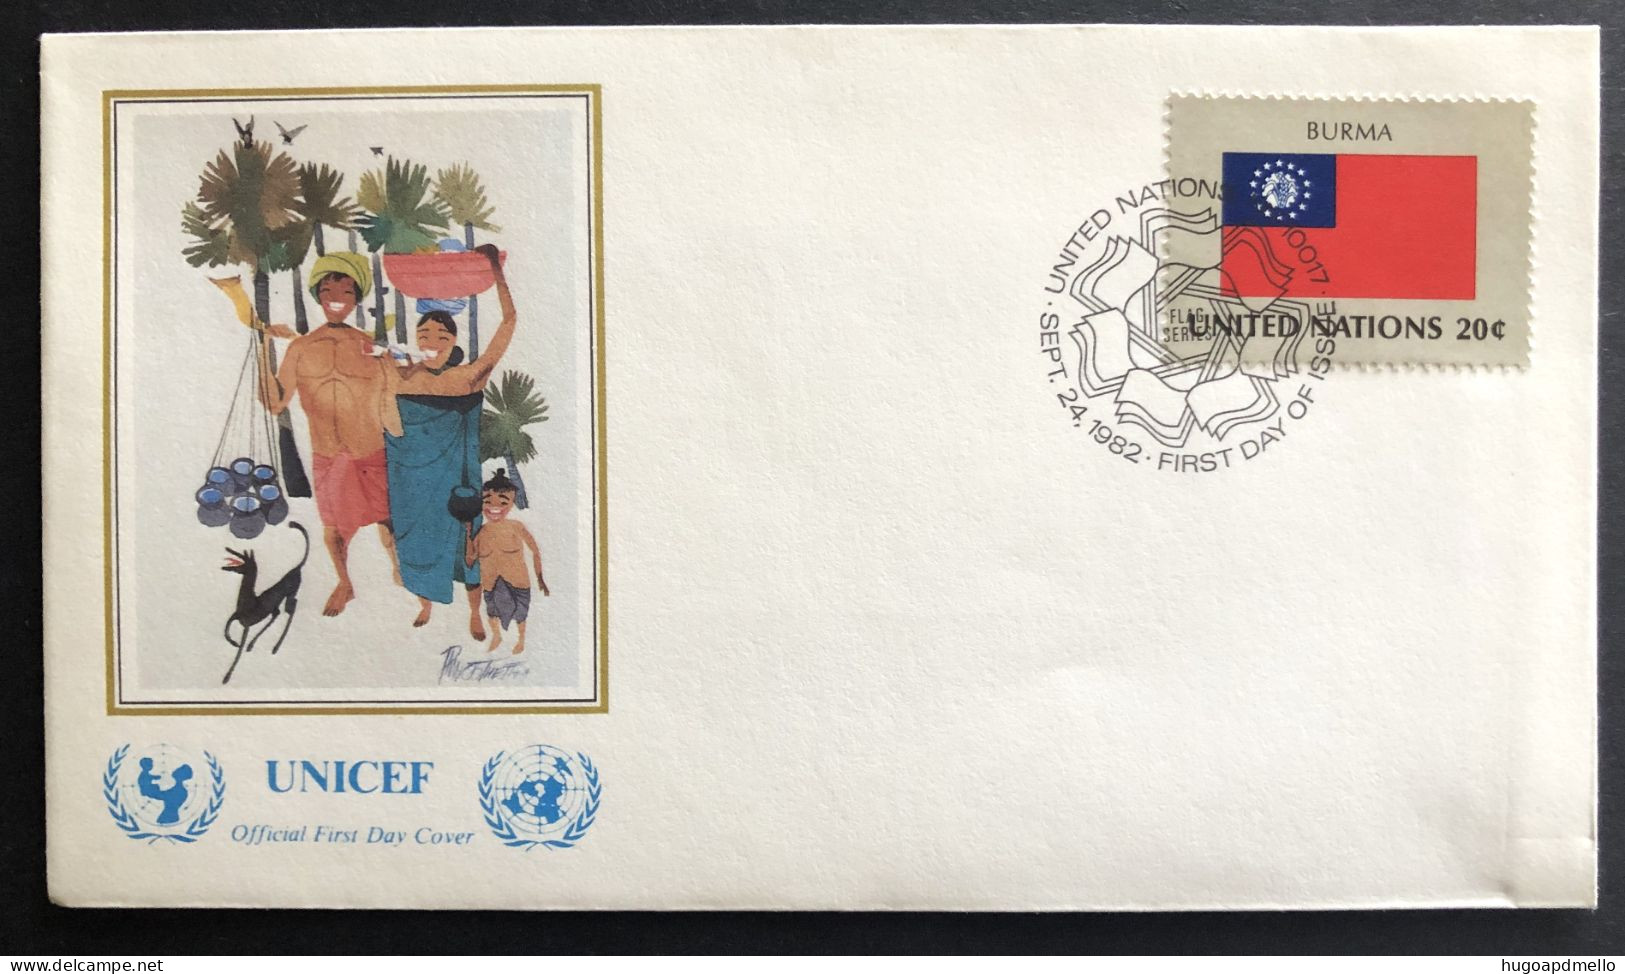 UNITED NATIONS,  FDC, UNICEF, « BURMA », Flags, Painting, 1982 - UNICEF